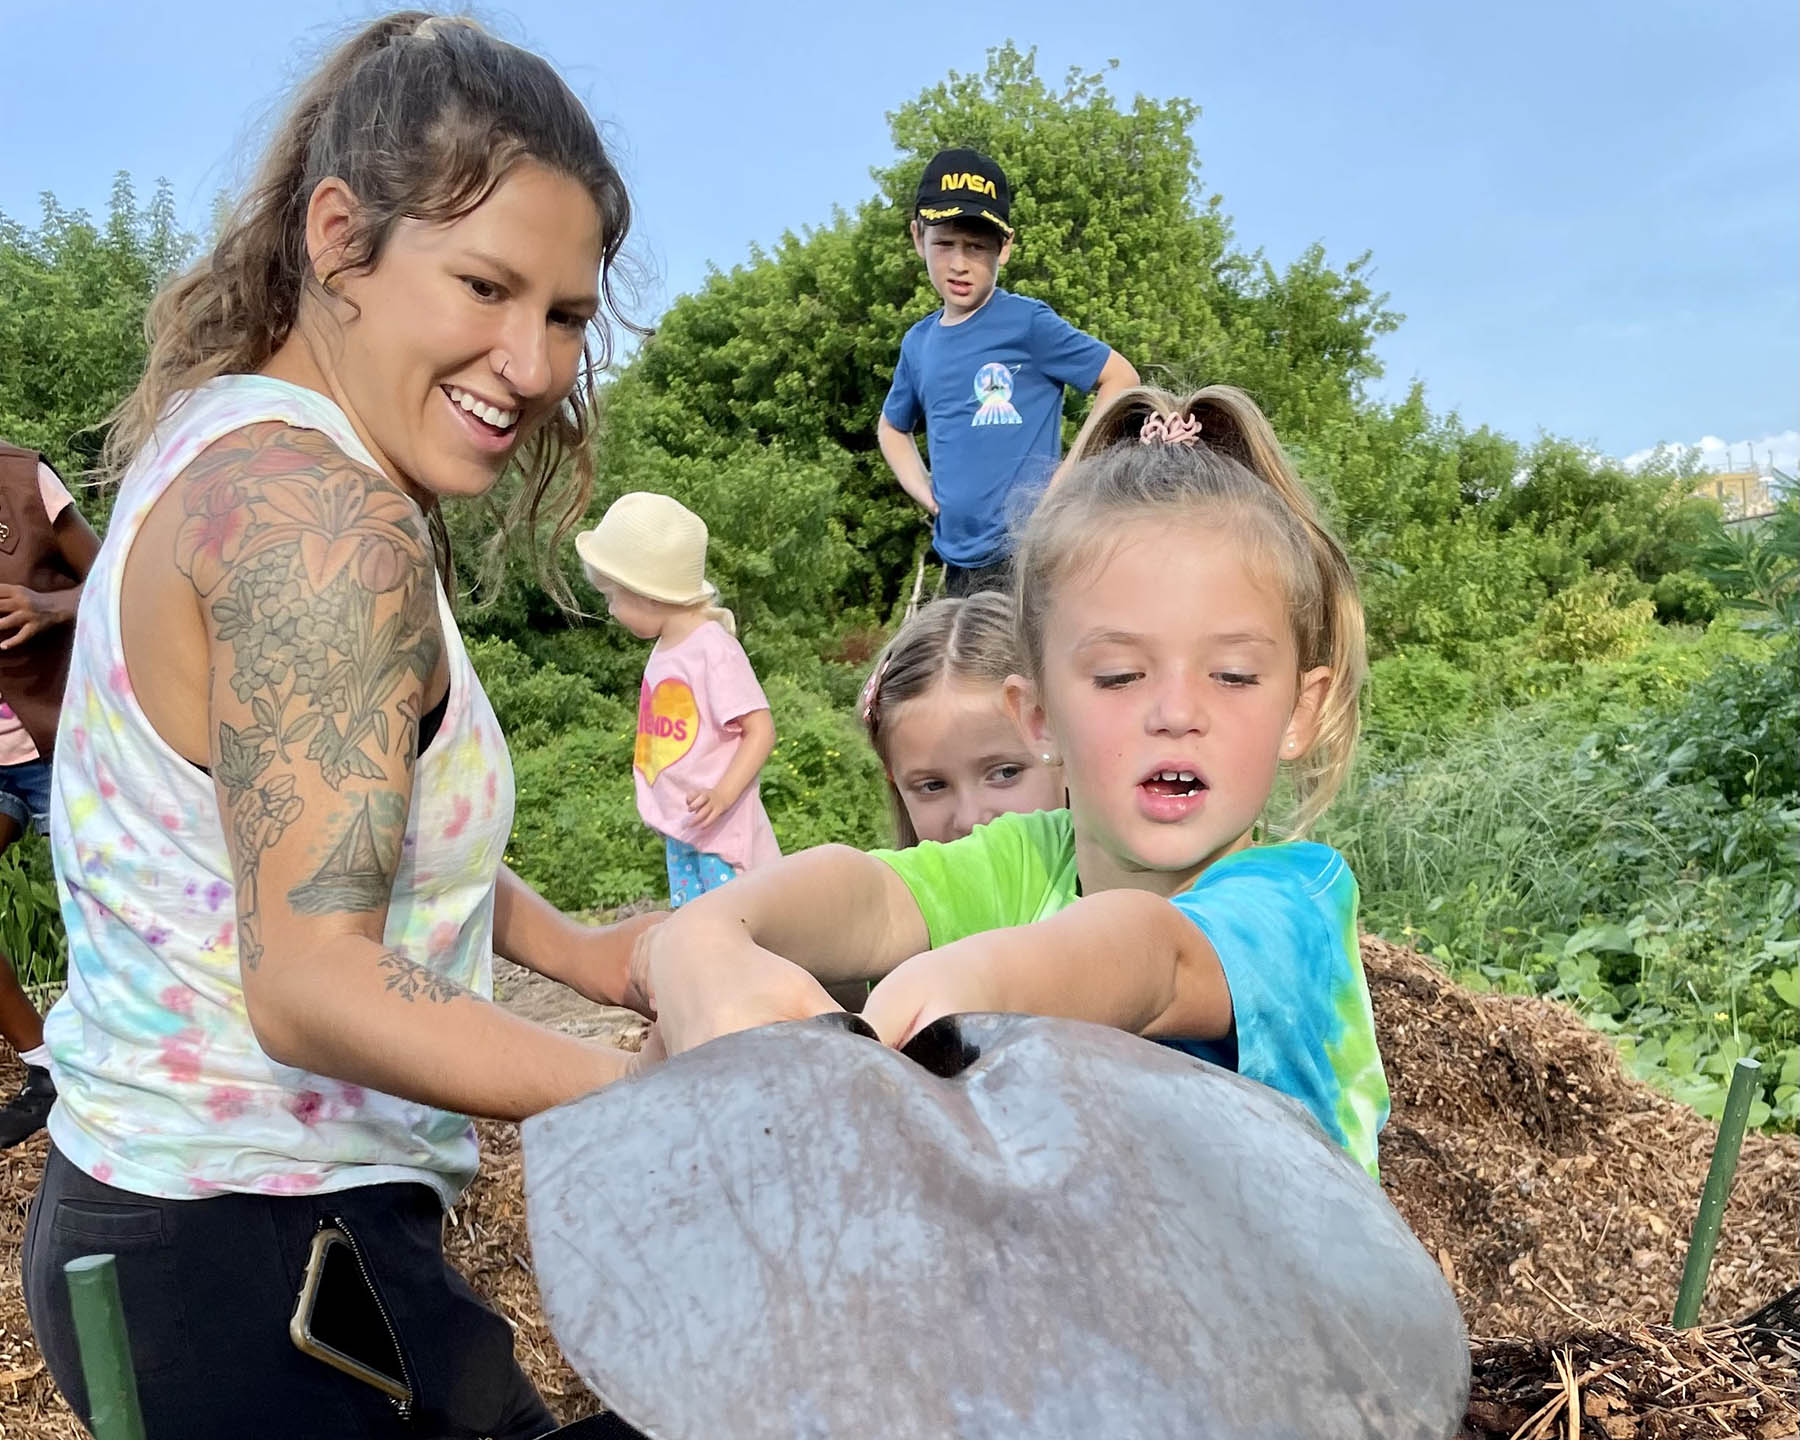 Young woman with tattoos helps a young girl use a shovel at a mulch pile